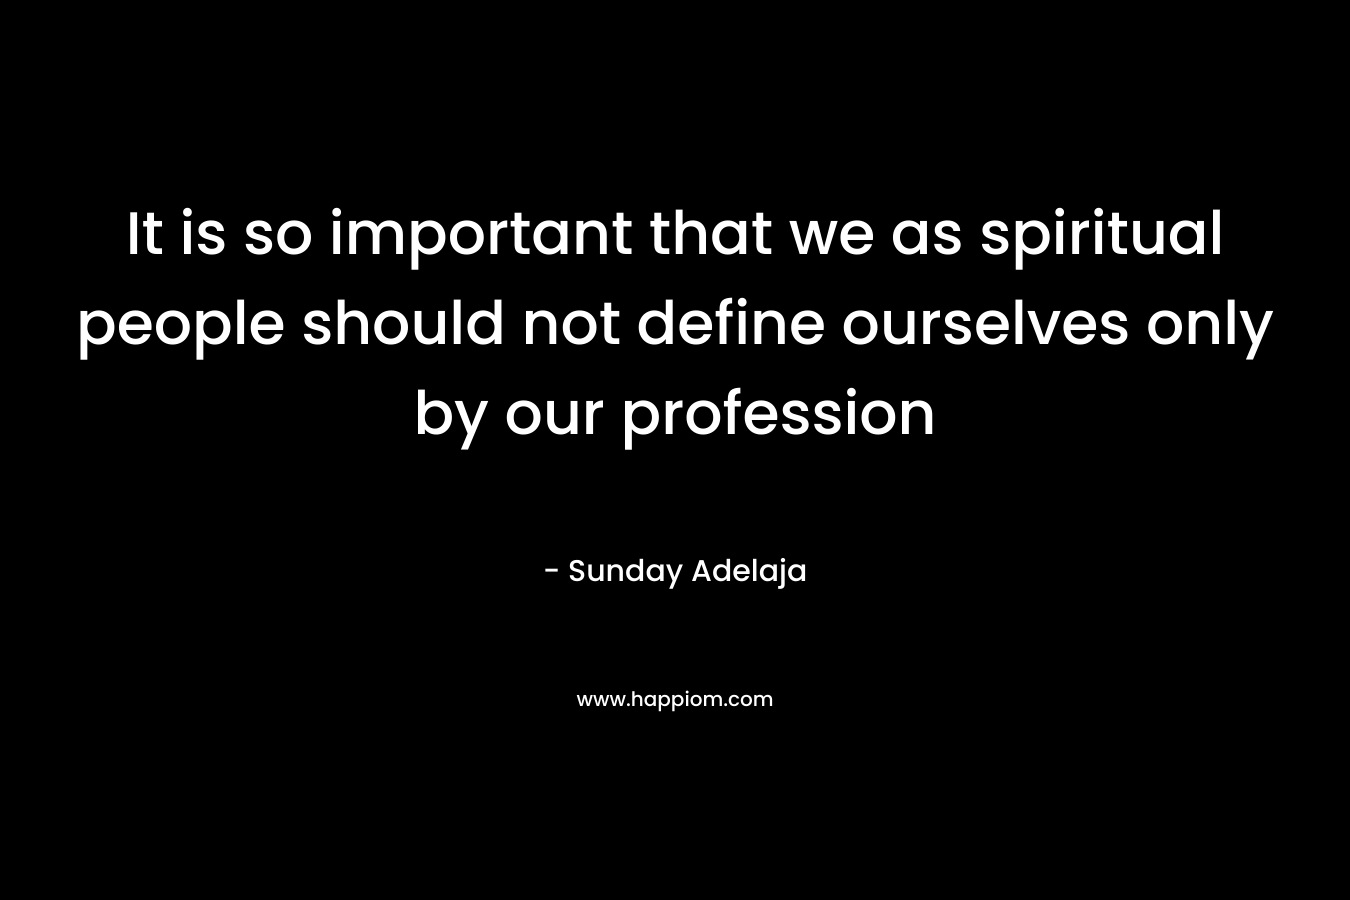 It is so important that we as spiritual people should not define ourselves only by our profession